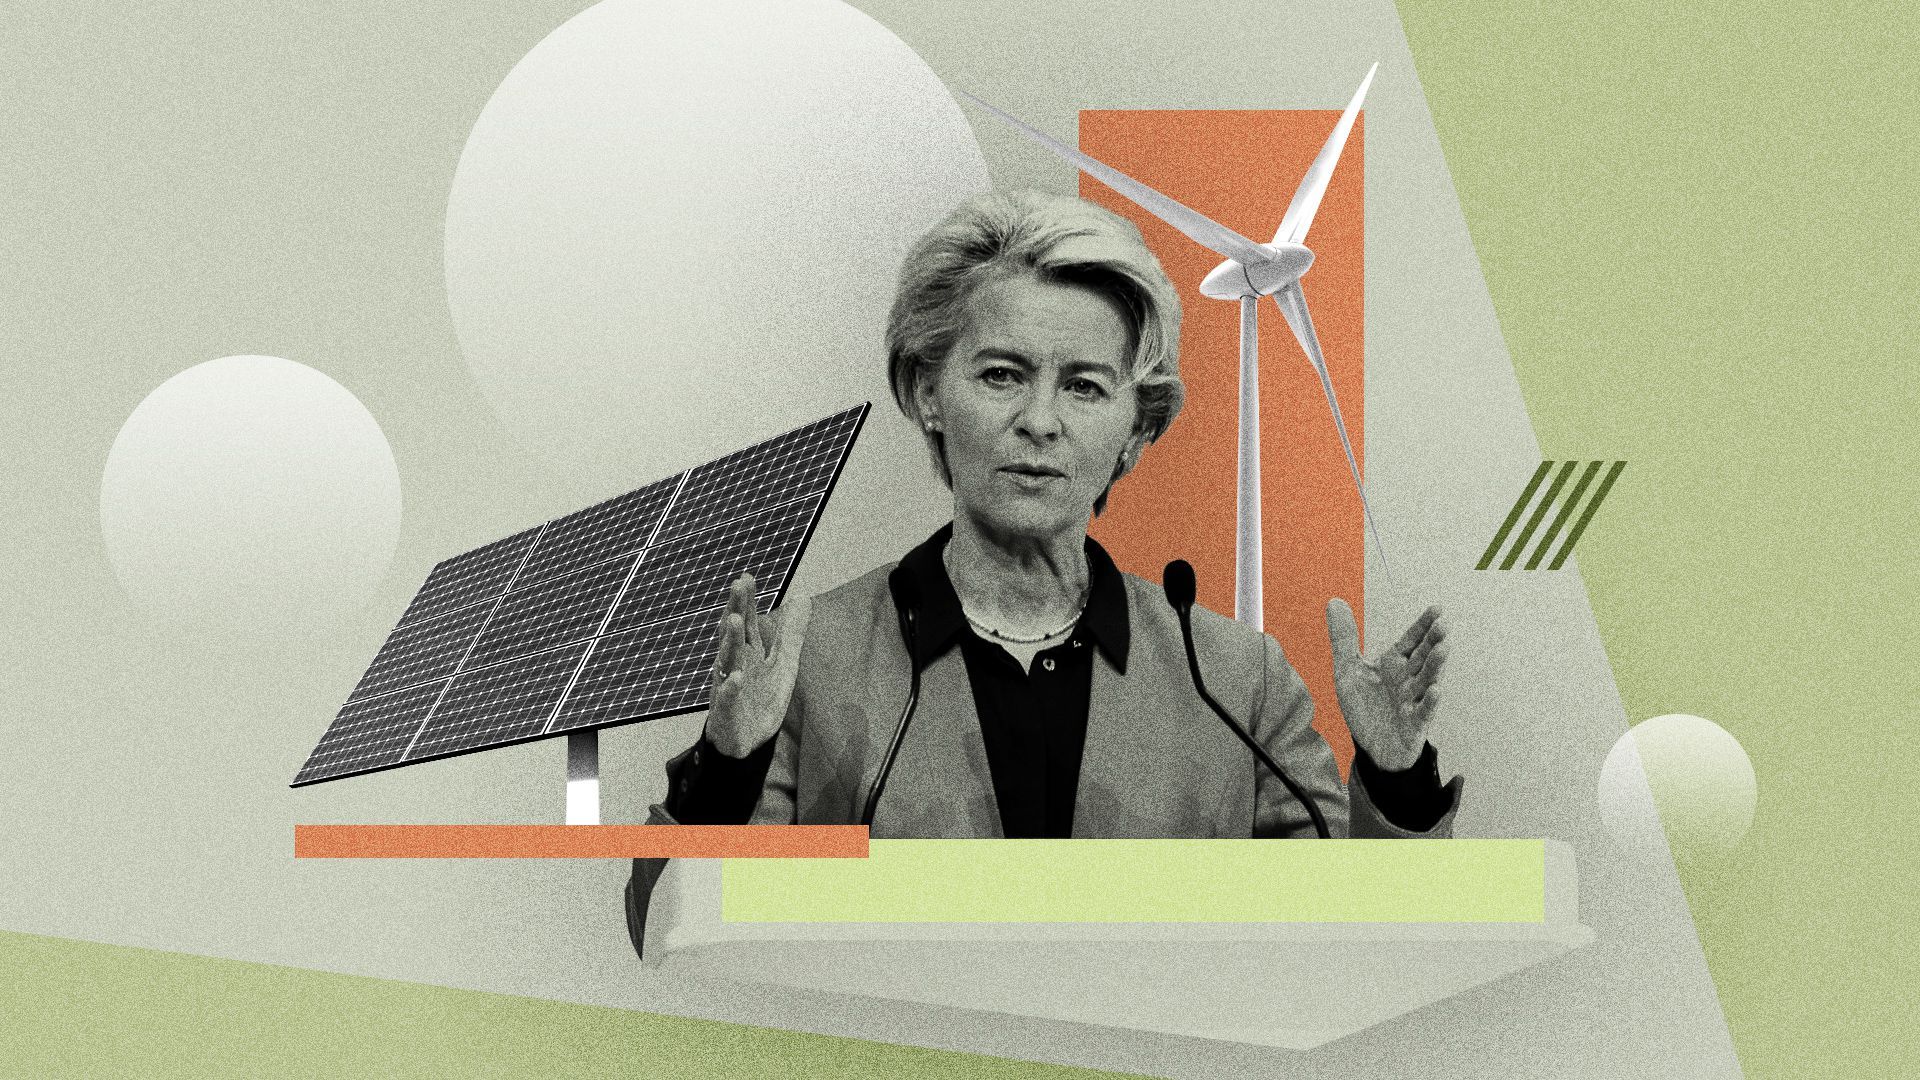 Photo illustration of Ursula Von der Leyen with a solar panel, wind turbine, and abstract shapes